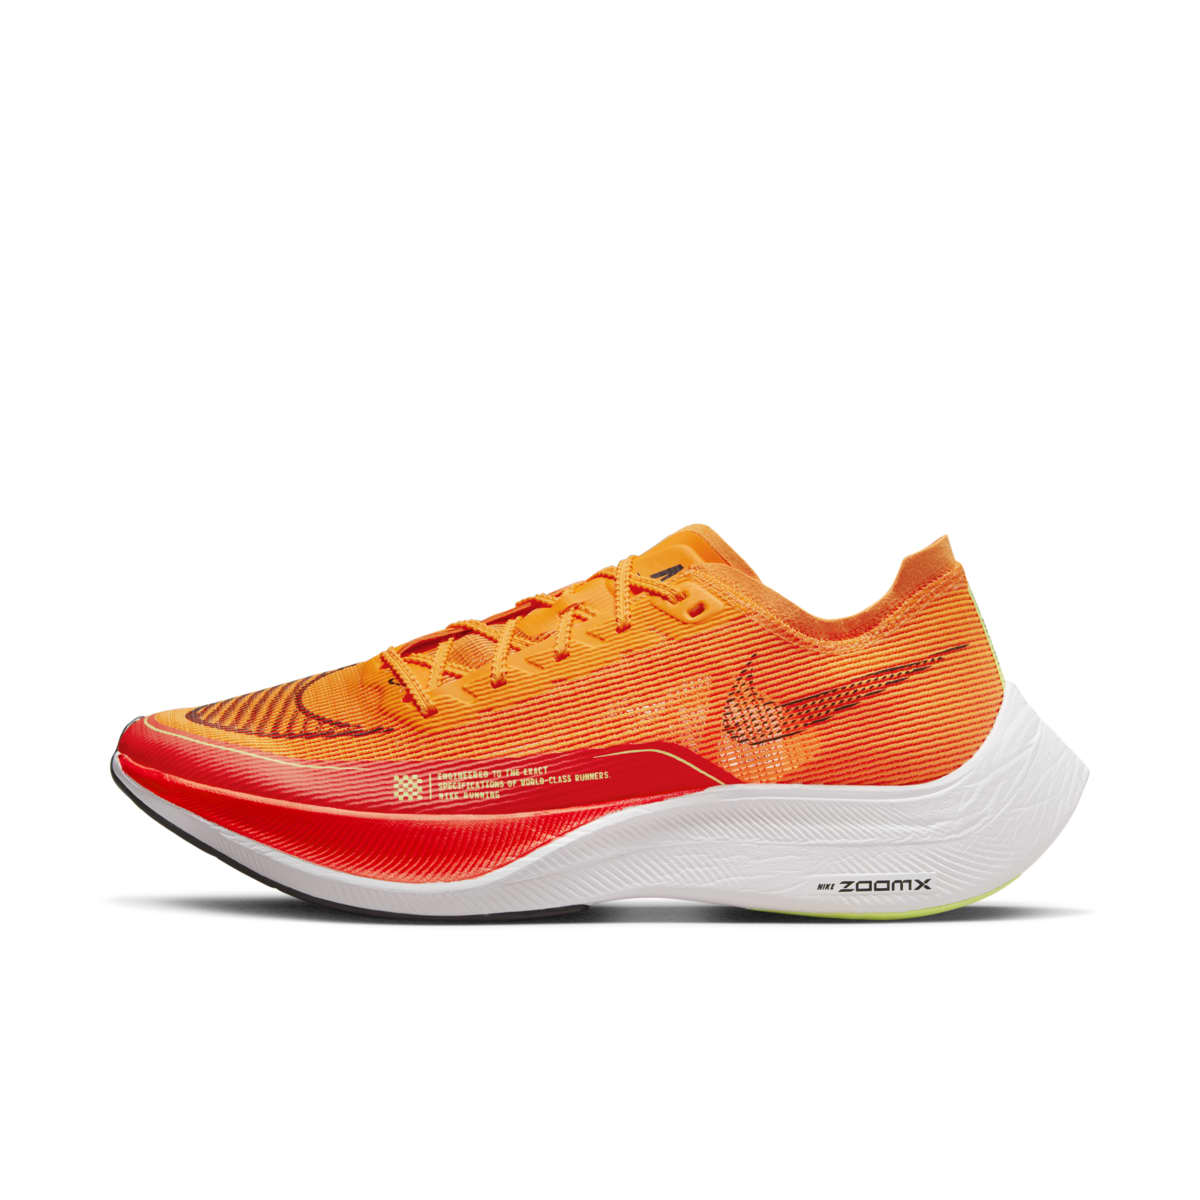 evidencia Decano Arrepentimiento ZoomX Vaporfly Next% 2 | Nike Footwear | Playmakers